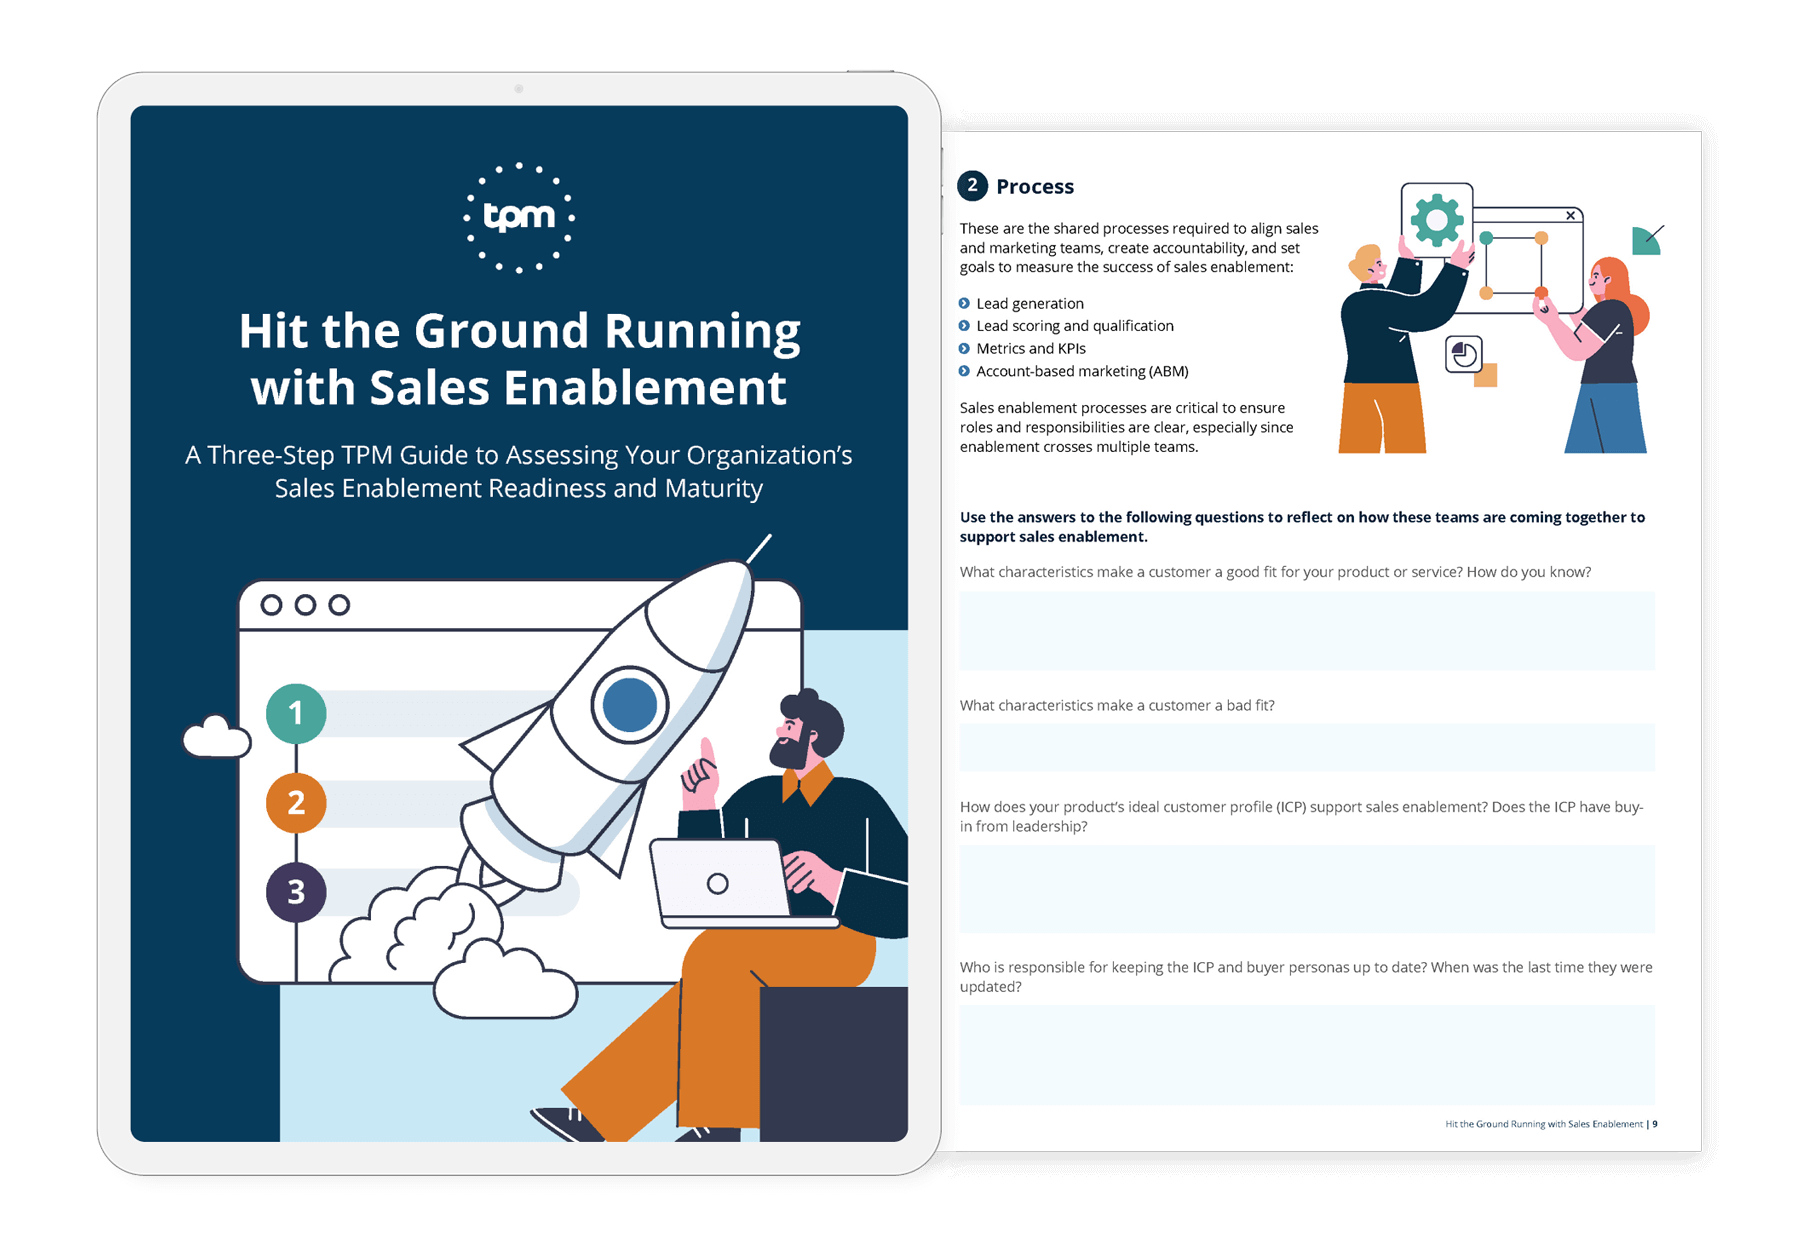 Hit the Ground Running with Sales Enablement